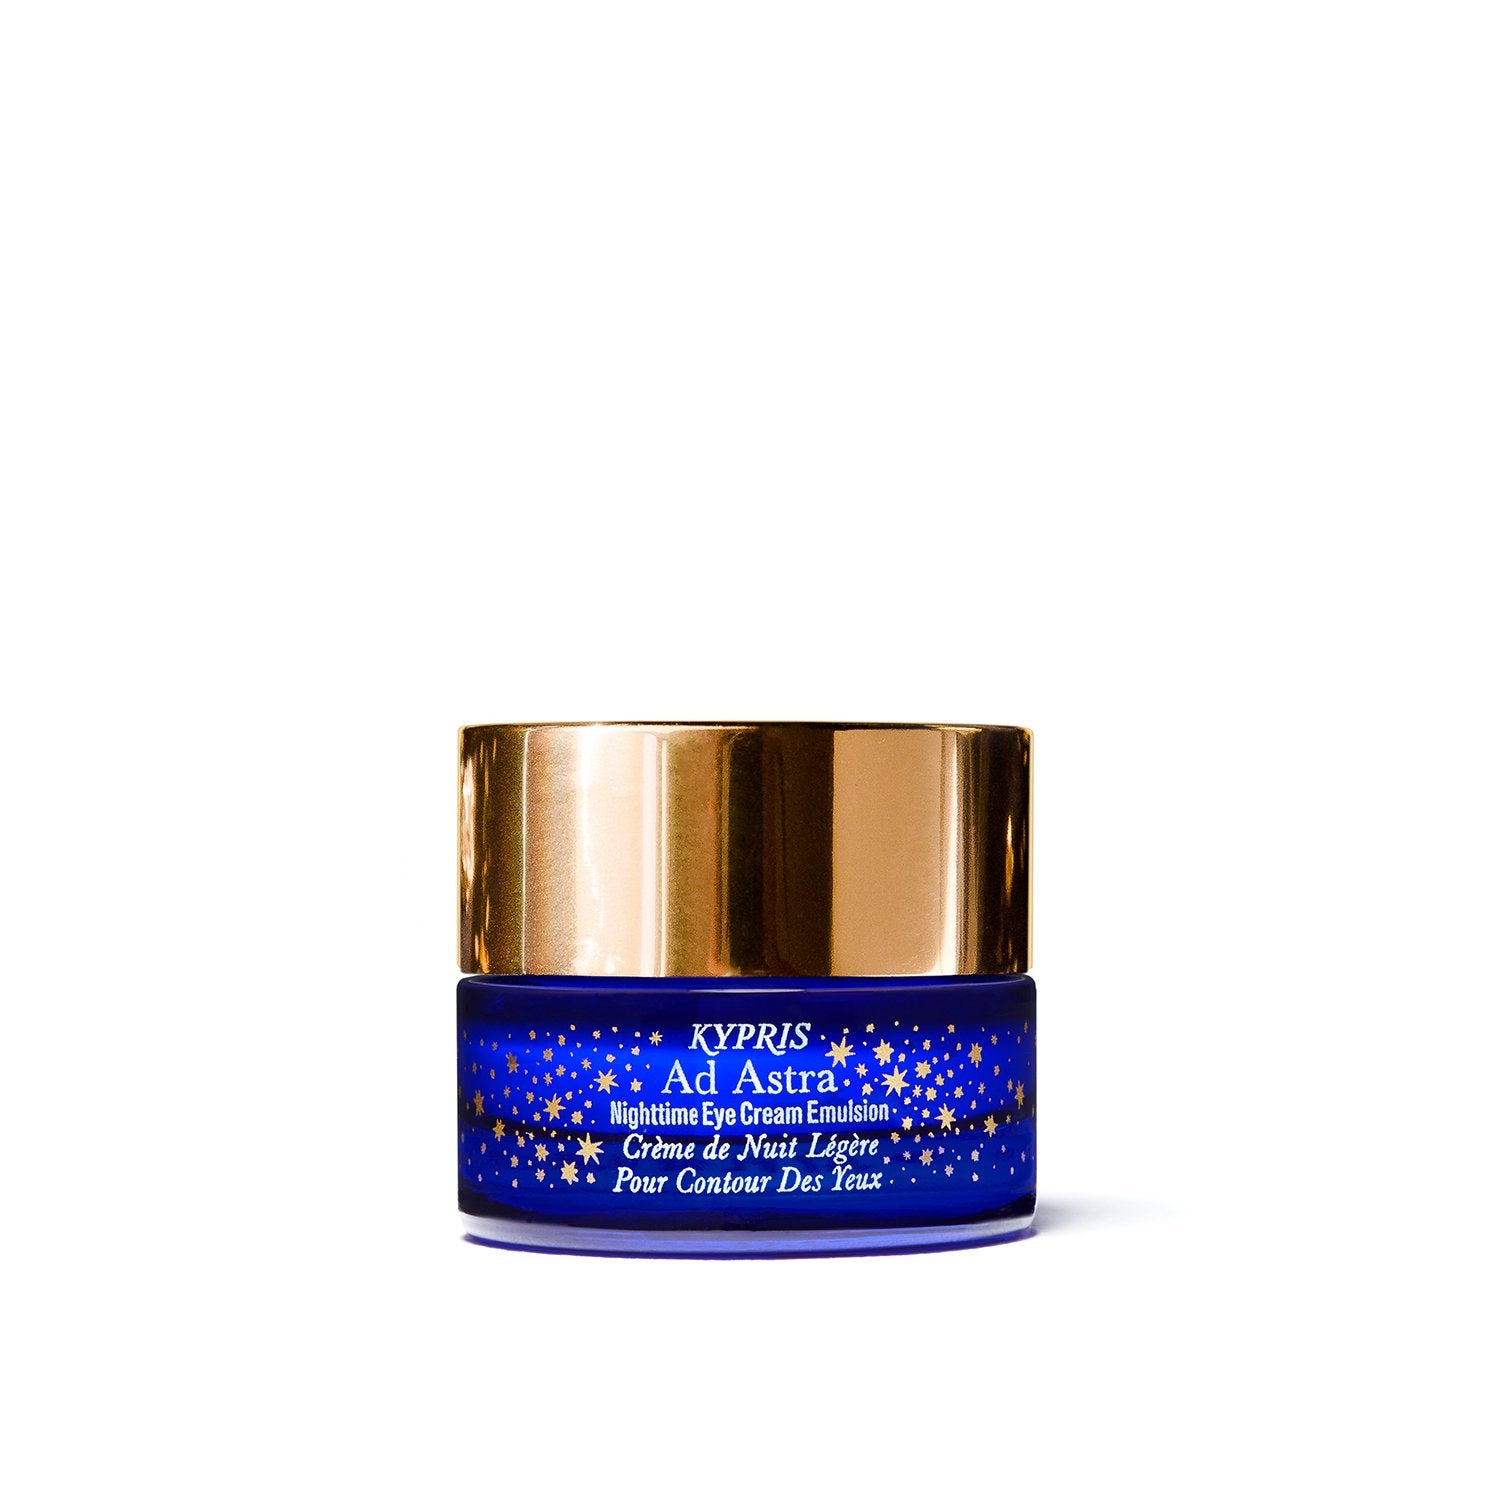 Ad Astra Nighttime Eye Cream Emulsion, in cobalt glass jar with gold lid, on white background.